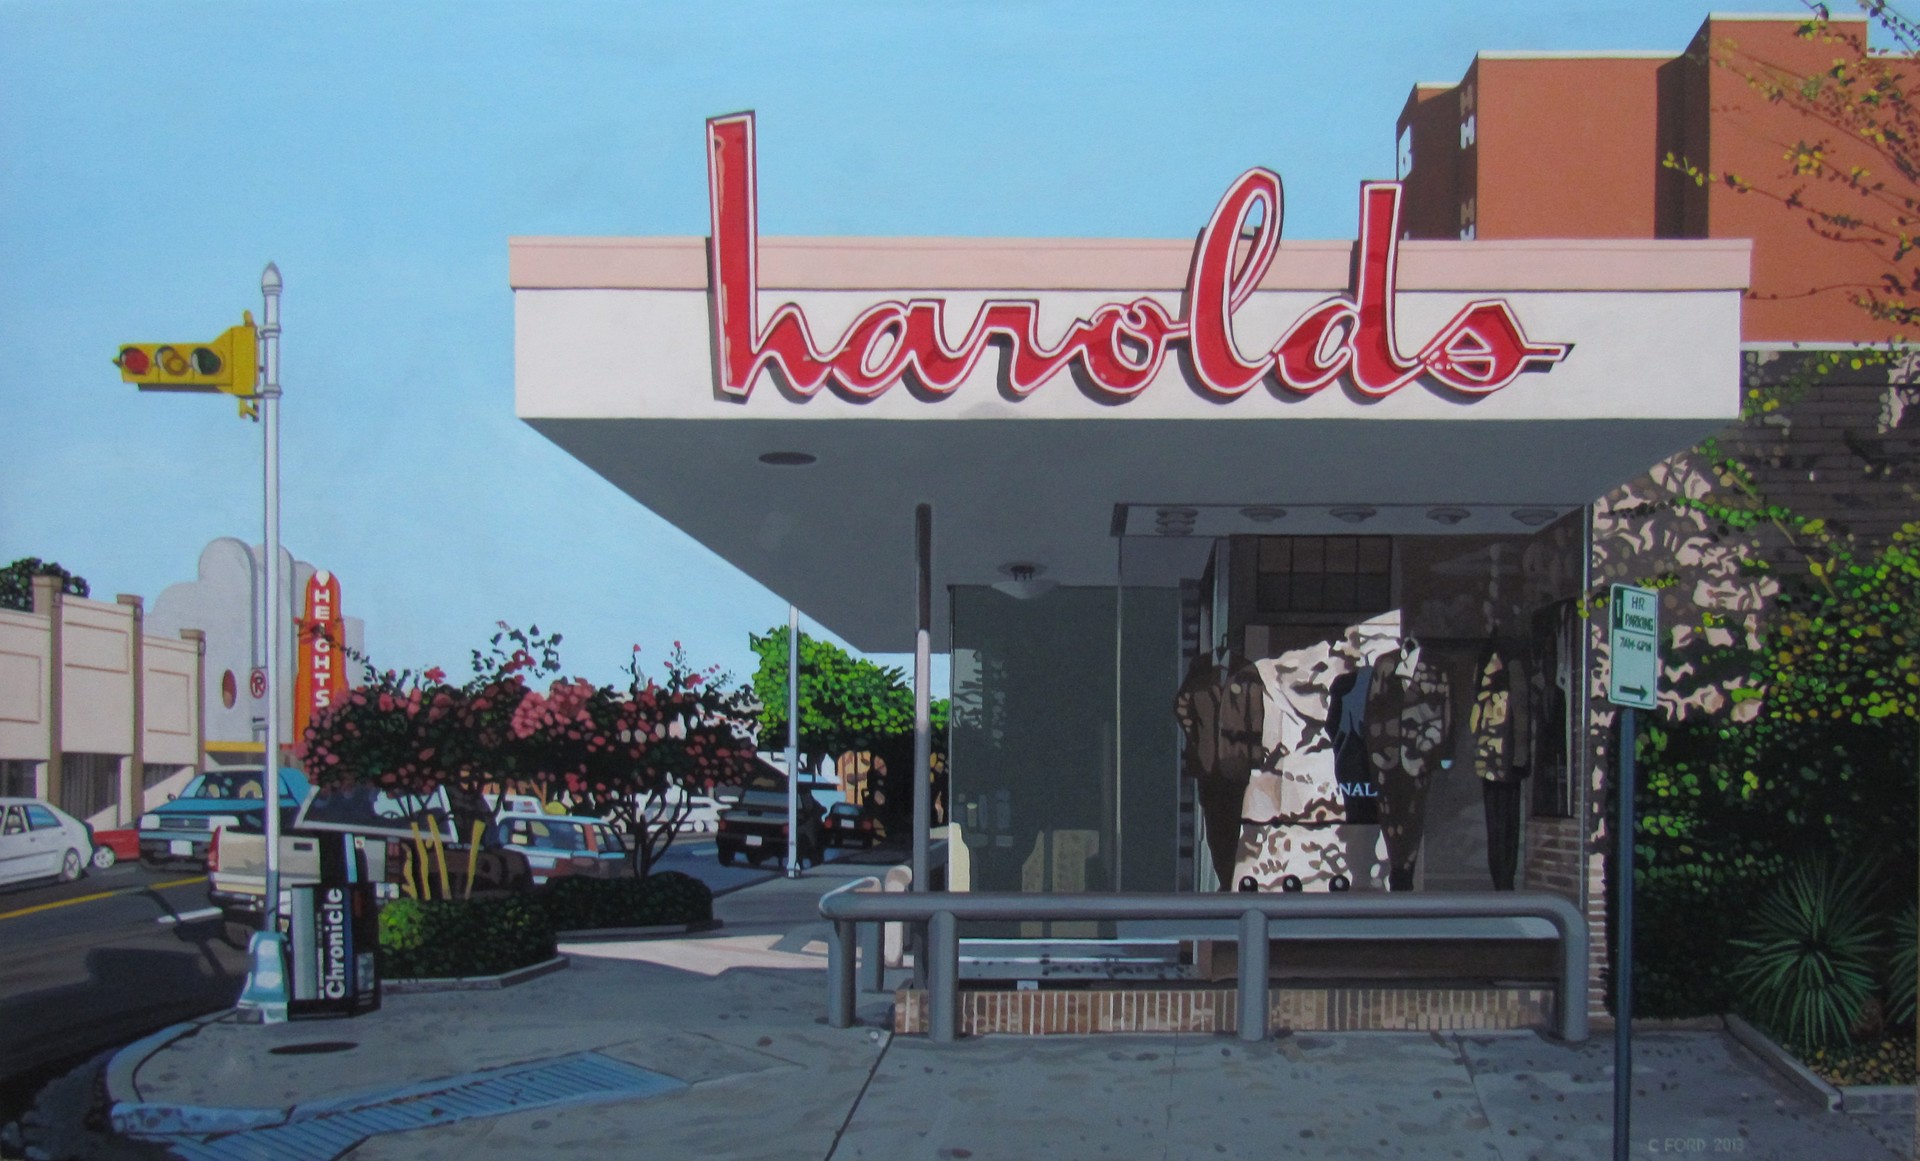 Harolds by Charles Ford